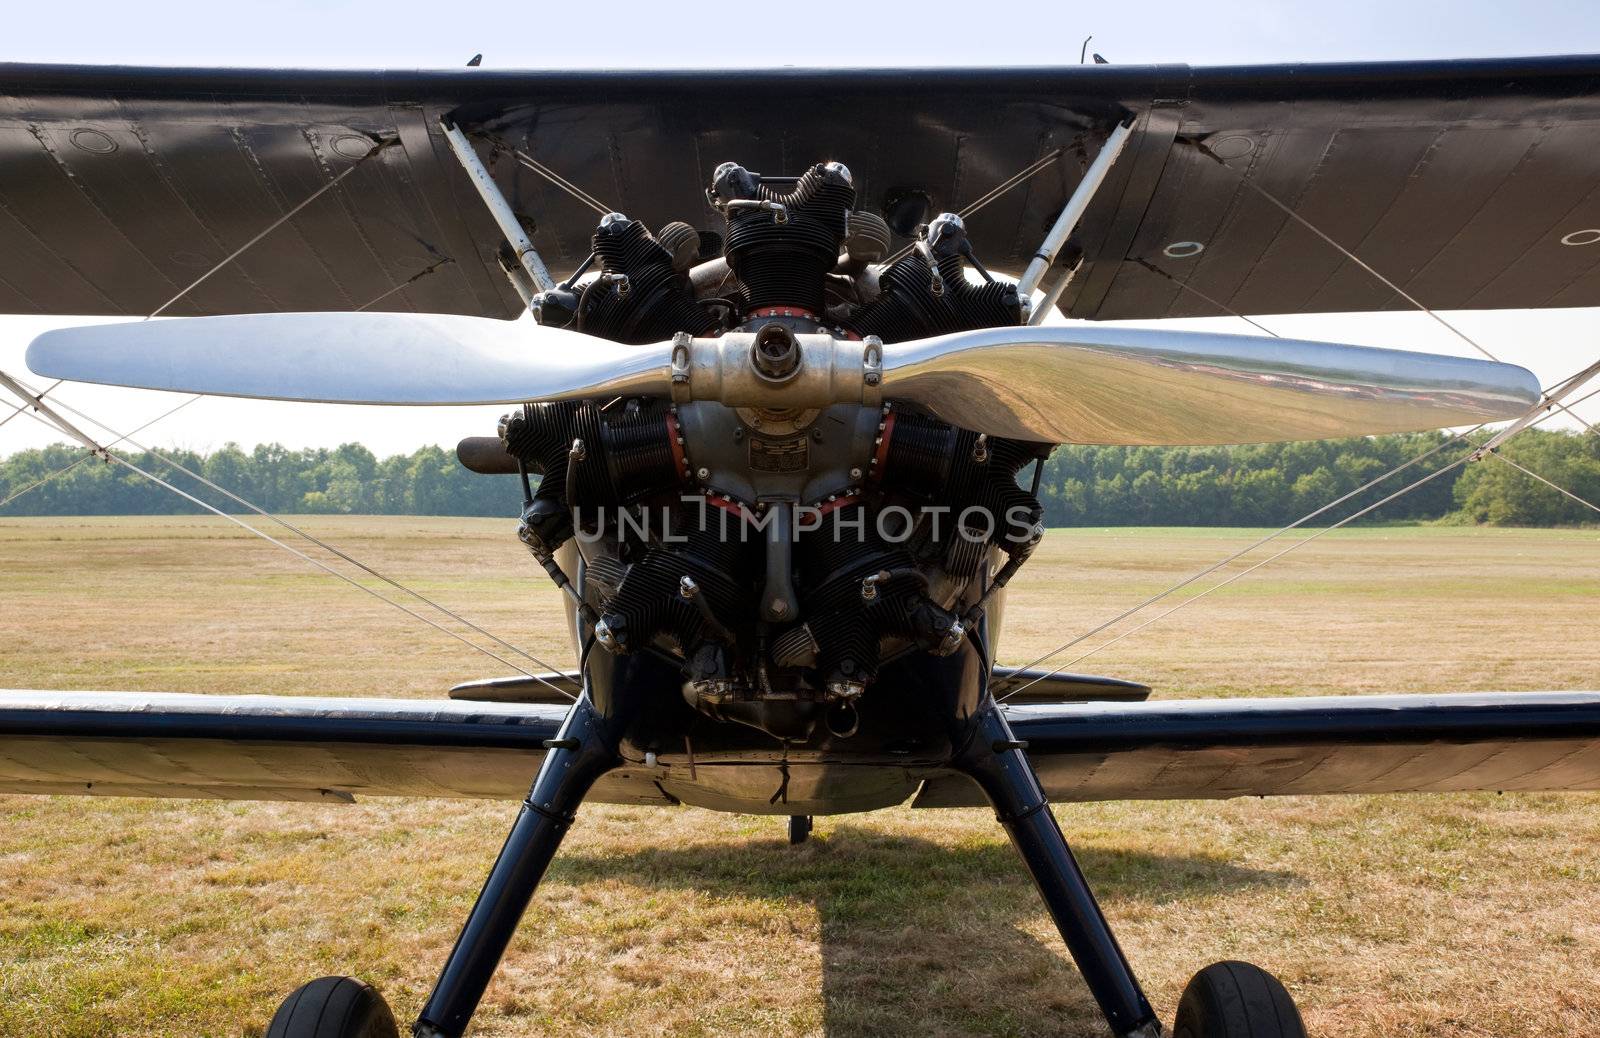 Propeller and engine of old biplane by steheap